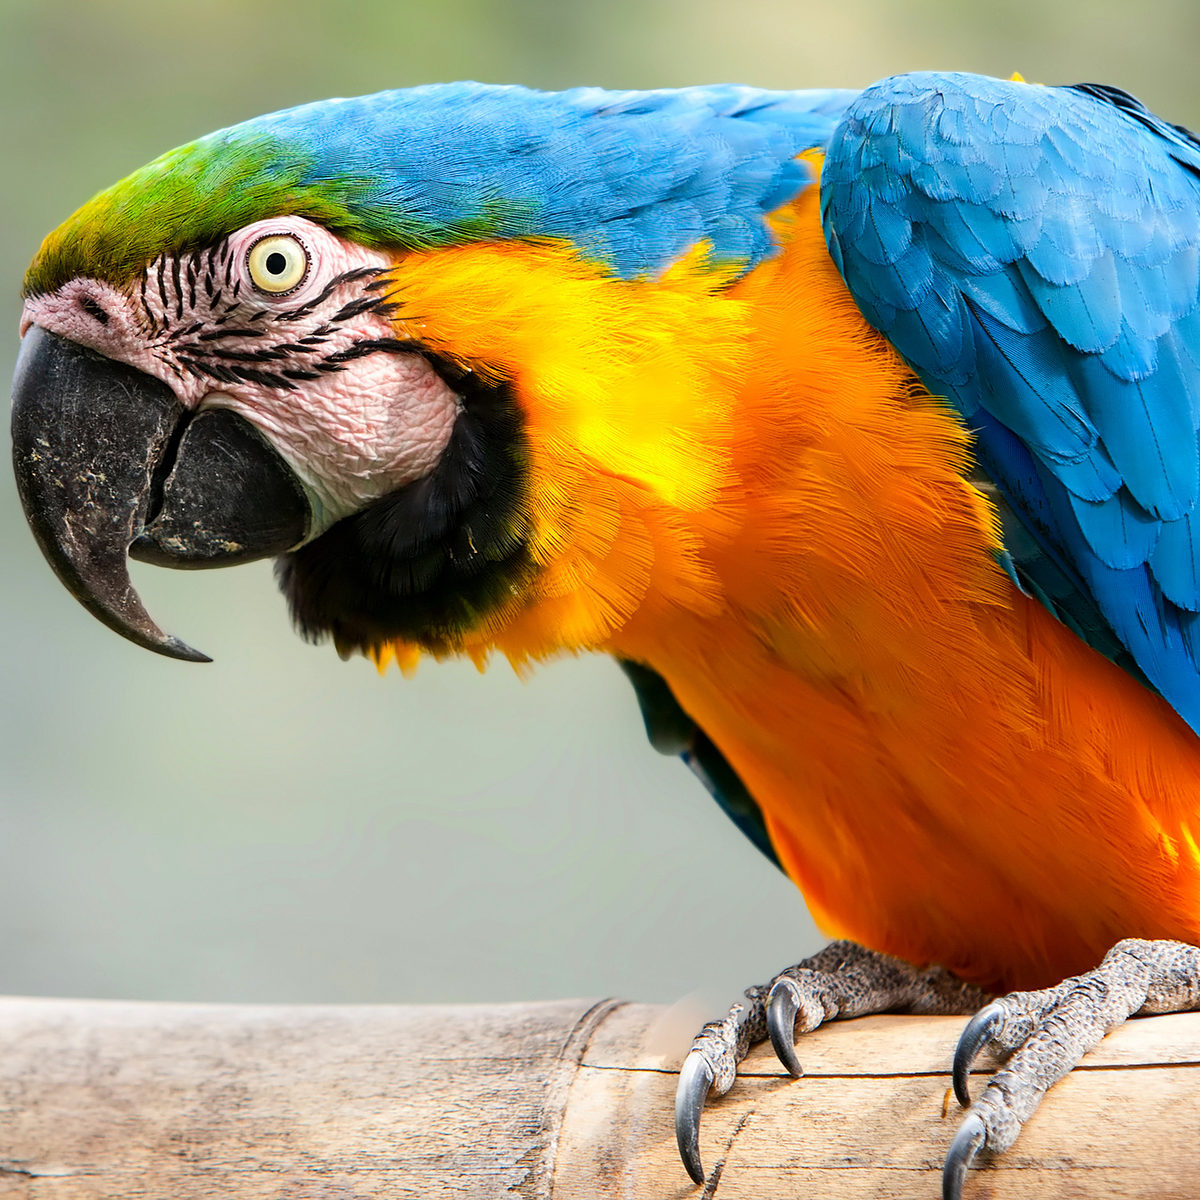 What Is the Life Expectancy of a Parrot?